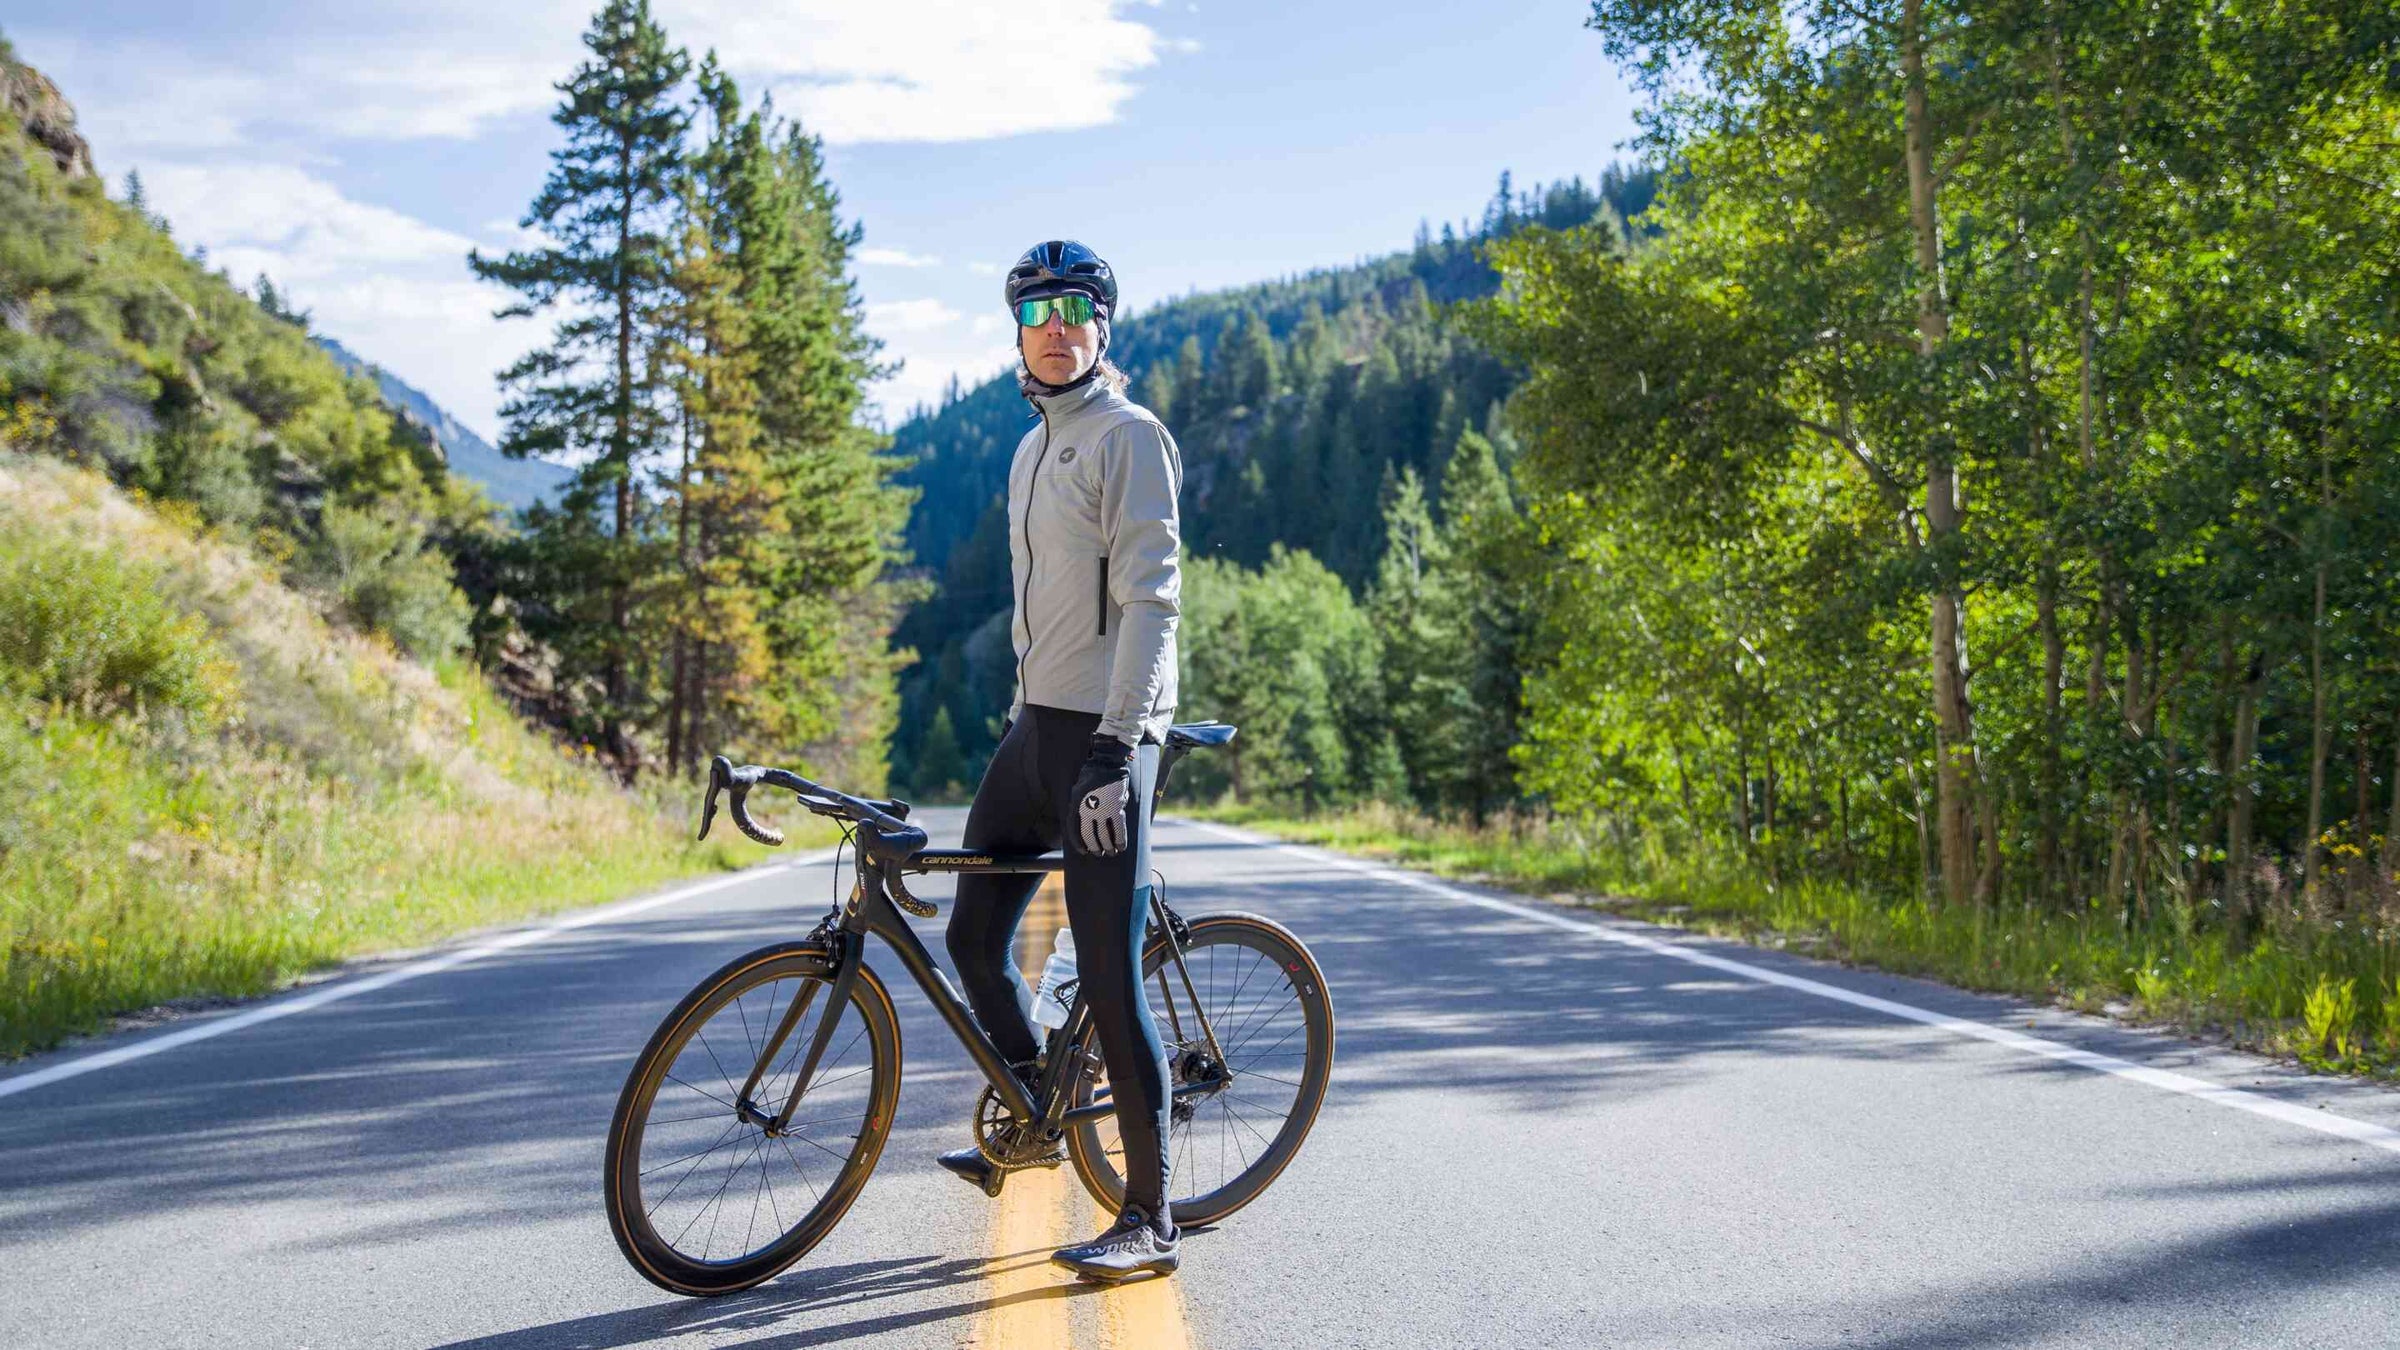 Men's Winter Weather Cycling Clothing by Indy freelance